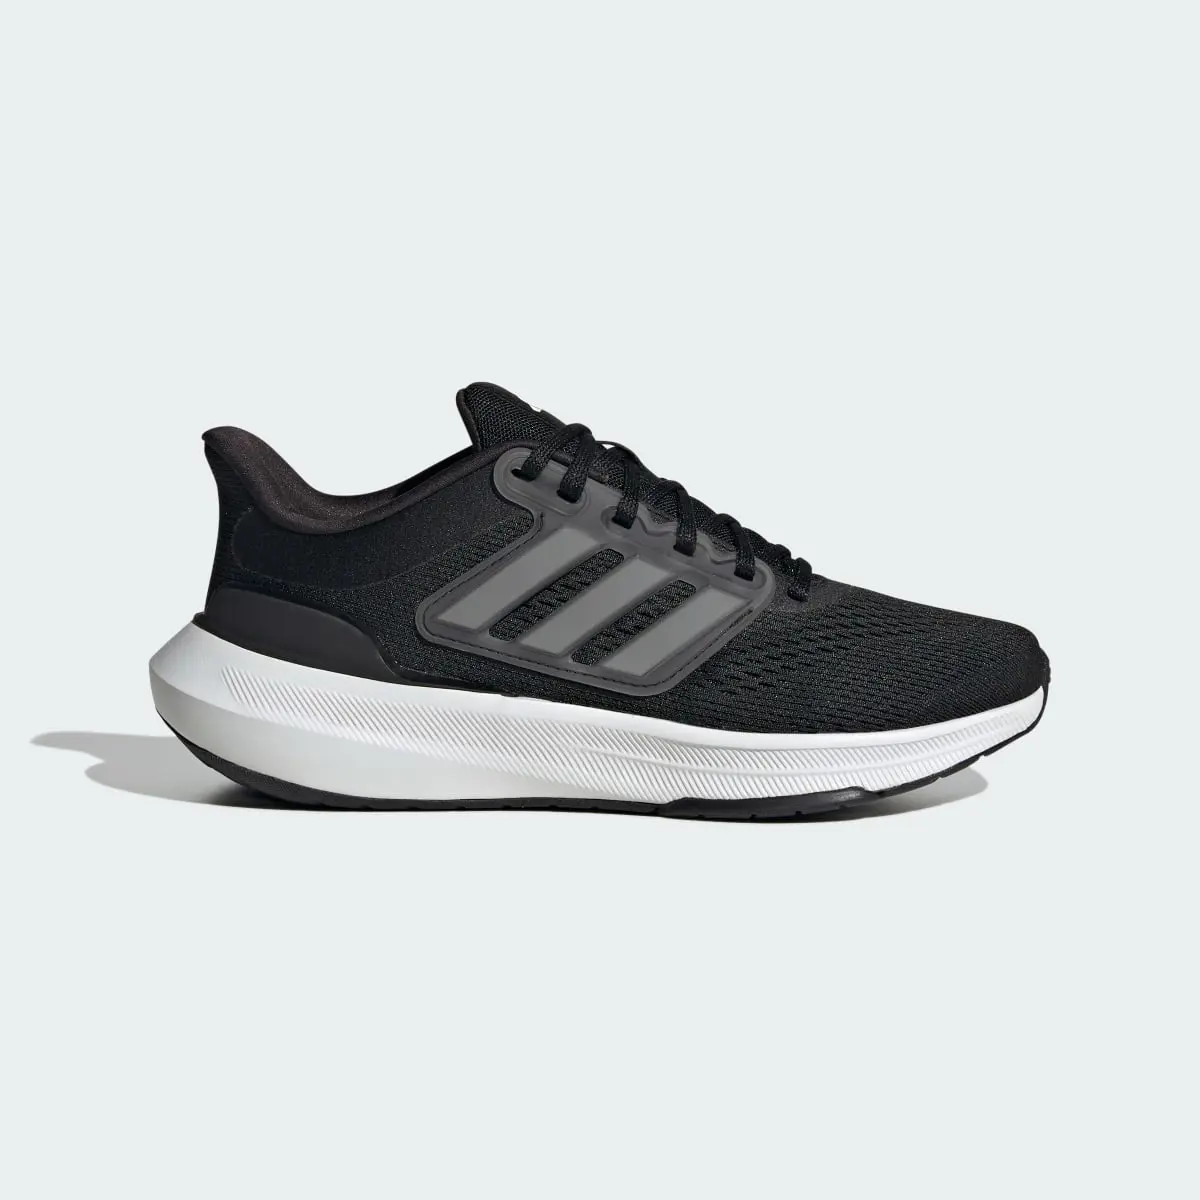 Adidas Chaussure Ultrabounce Chaussant large. 2